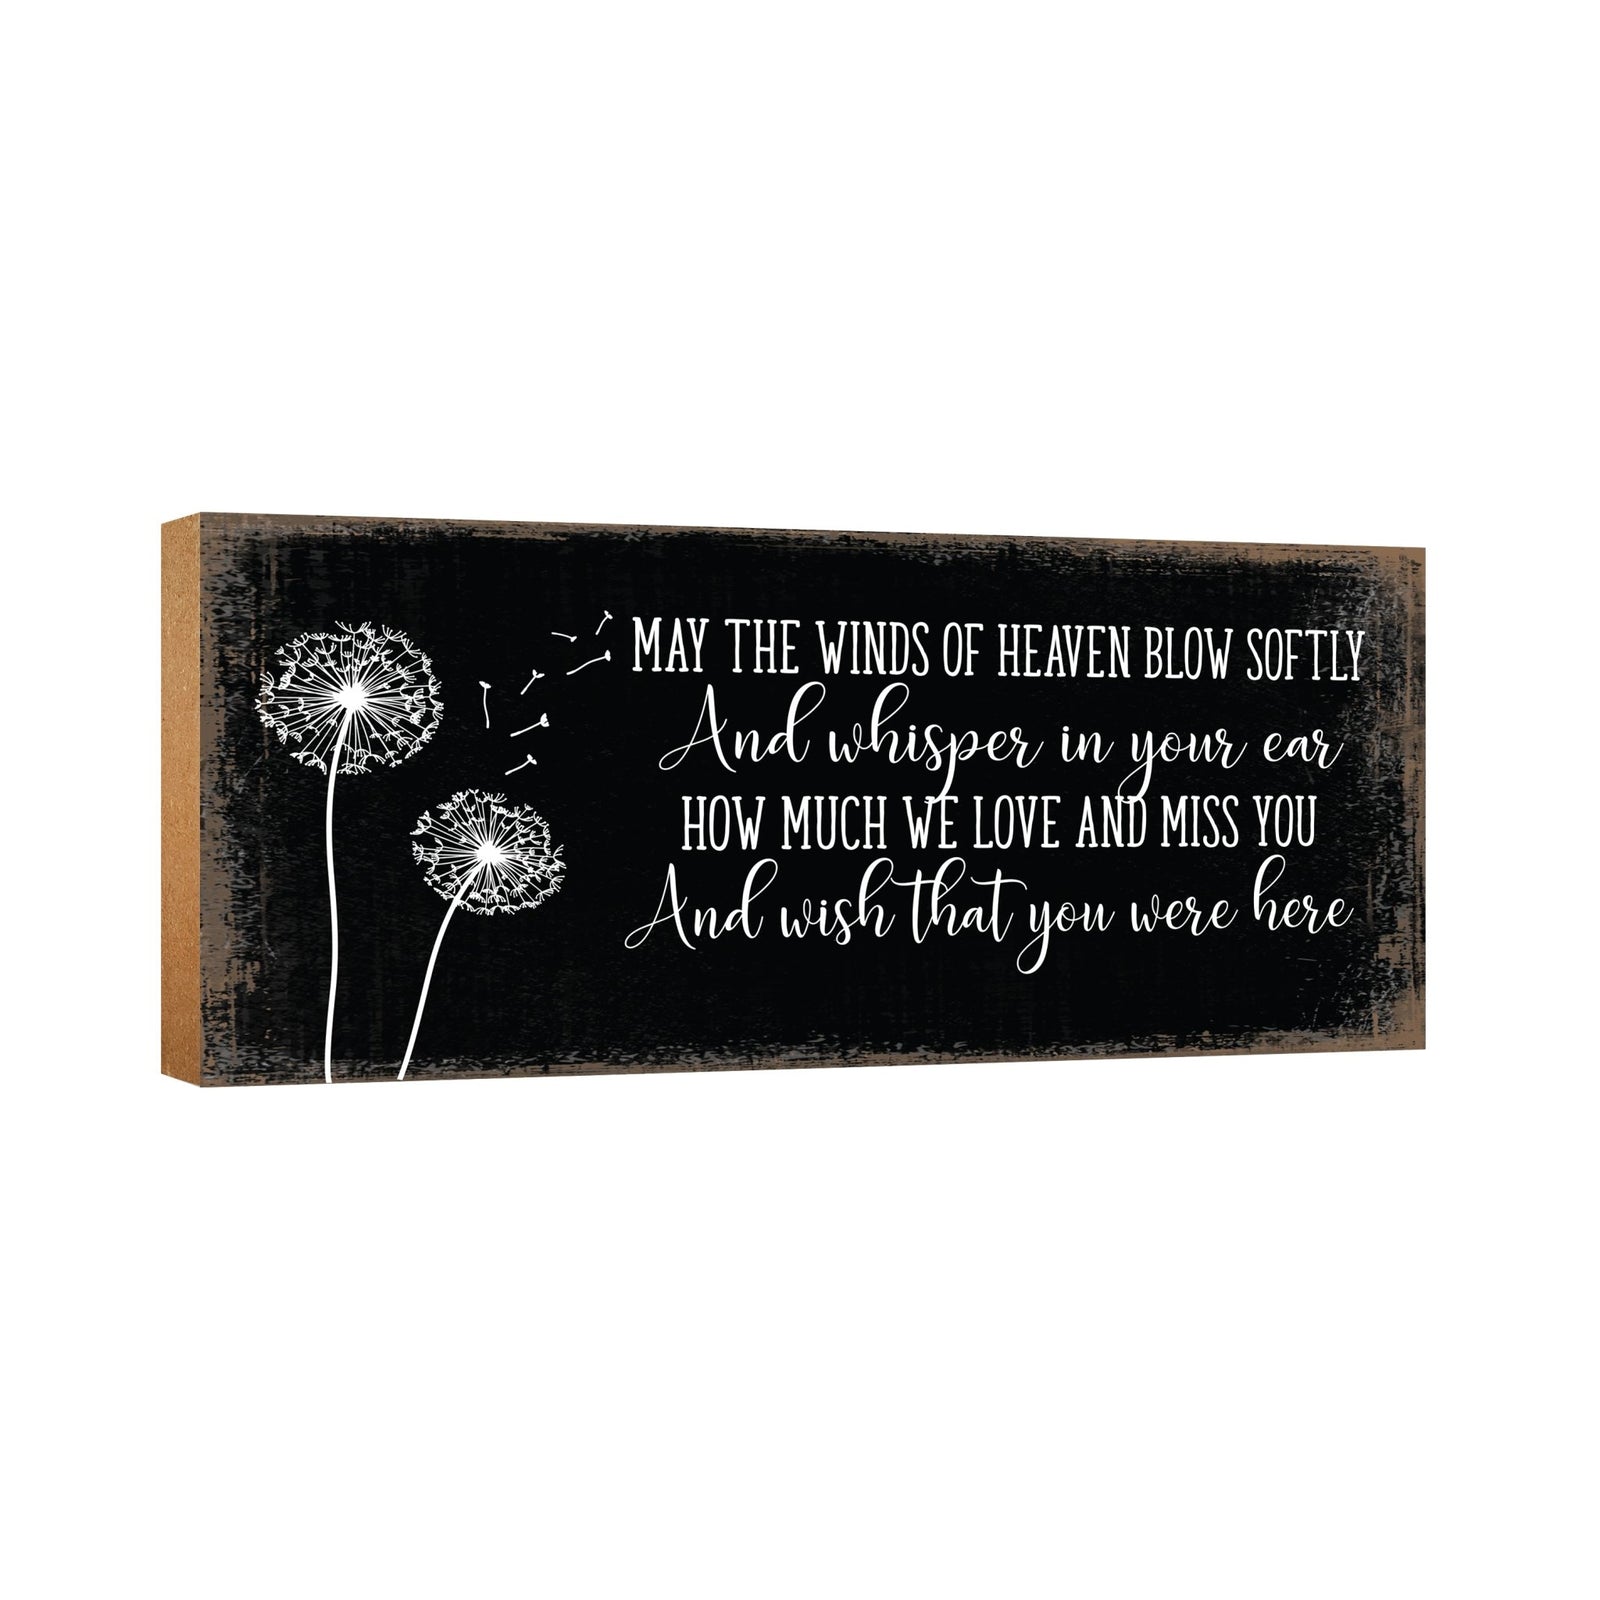 Modern Inspirational Pet Memorial 4x10 inches Wooden Sign (May The Winds) Tabletop Plaque Home Decoration Loss of Pet Bereavement Sympathy Keepsake - LifeSong Milestones